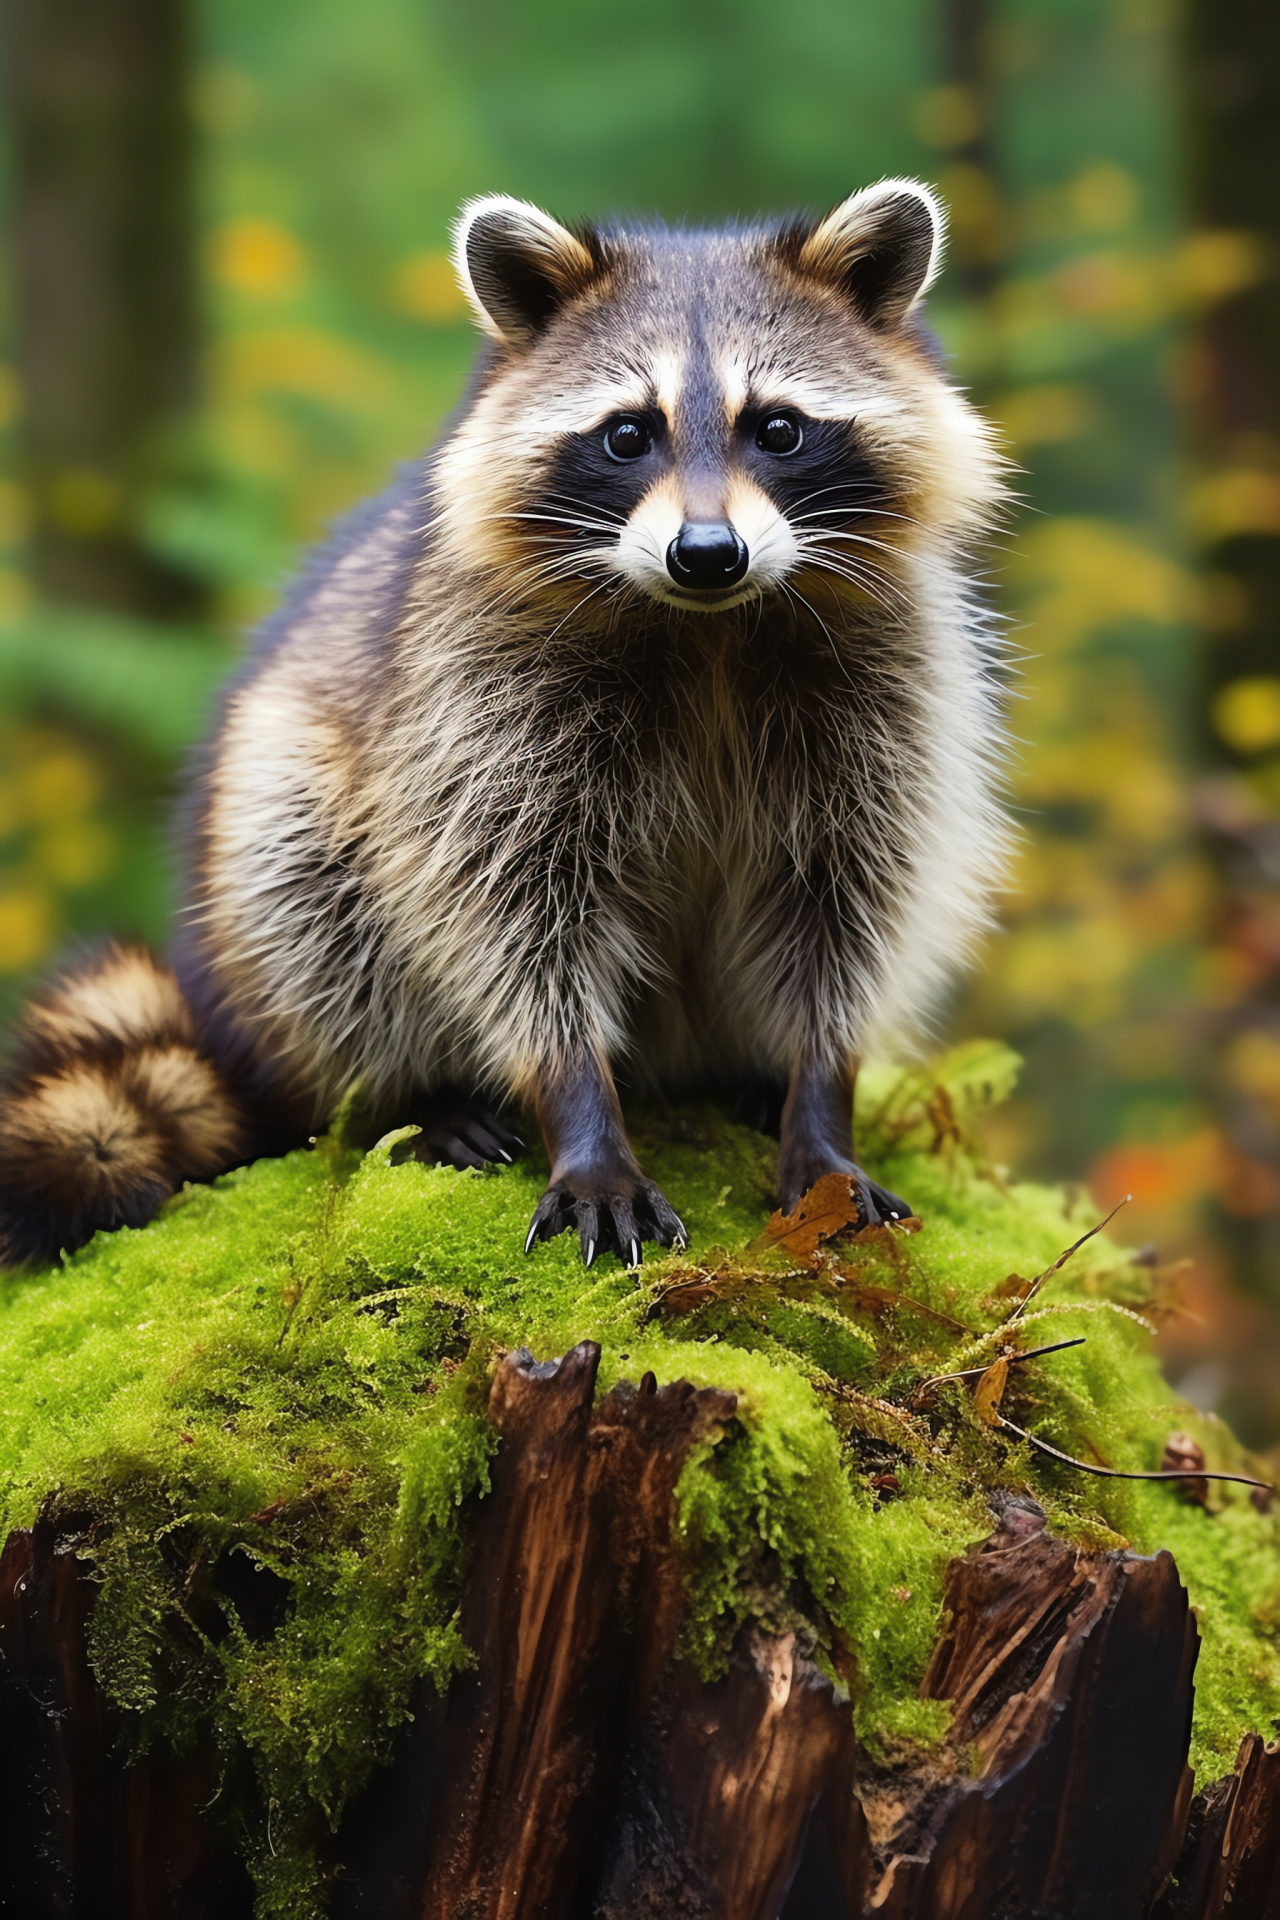 Senior raccoon, wise stare, weathered fur, rustic setting, tranquil backdrop, HD Phone Image